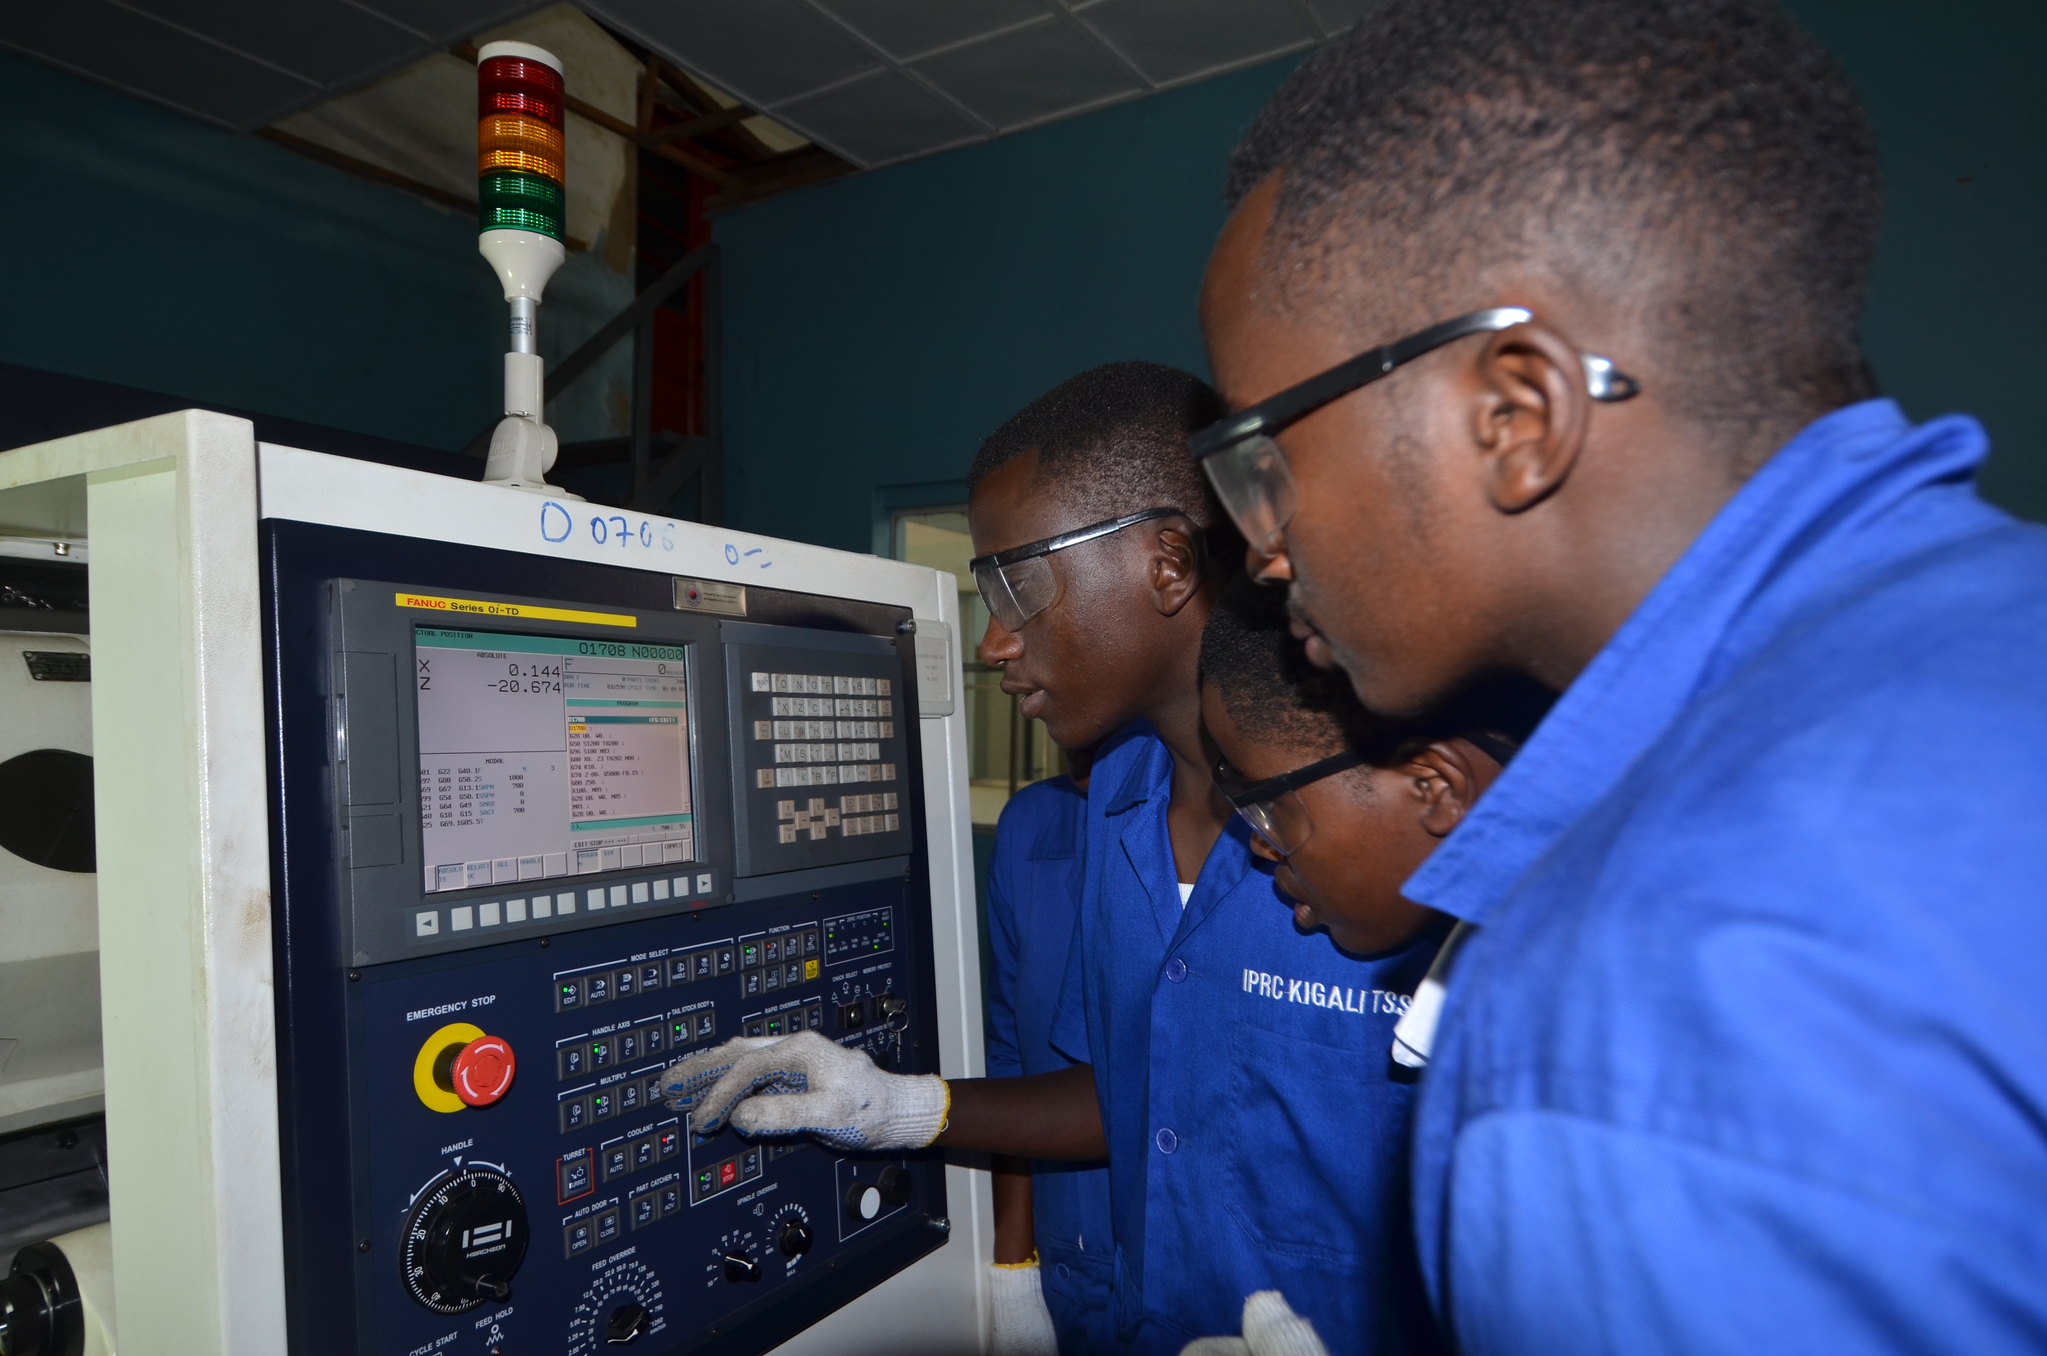 Students use a modern machine at IPRC Kicukiro. Rosemary Mbabazi, the minister for Youth and Culture, said that technology advancement should inform young peopleu2019s career paths as an enabler for other sectors. Photo: Sam Ngendahimana.